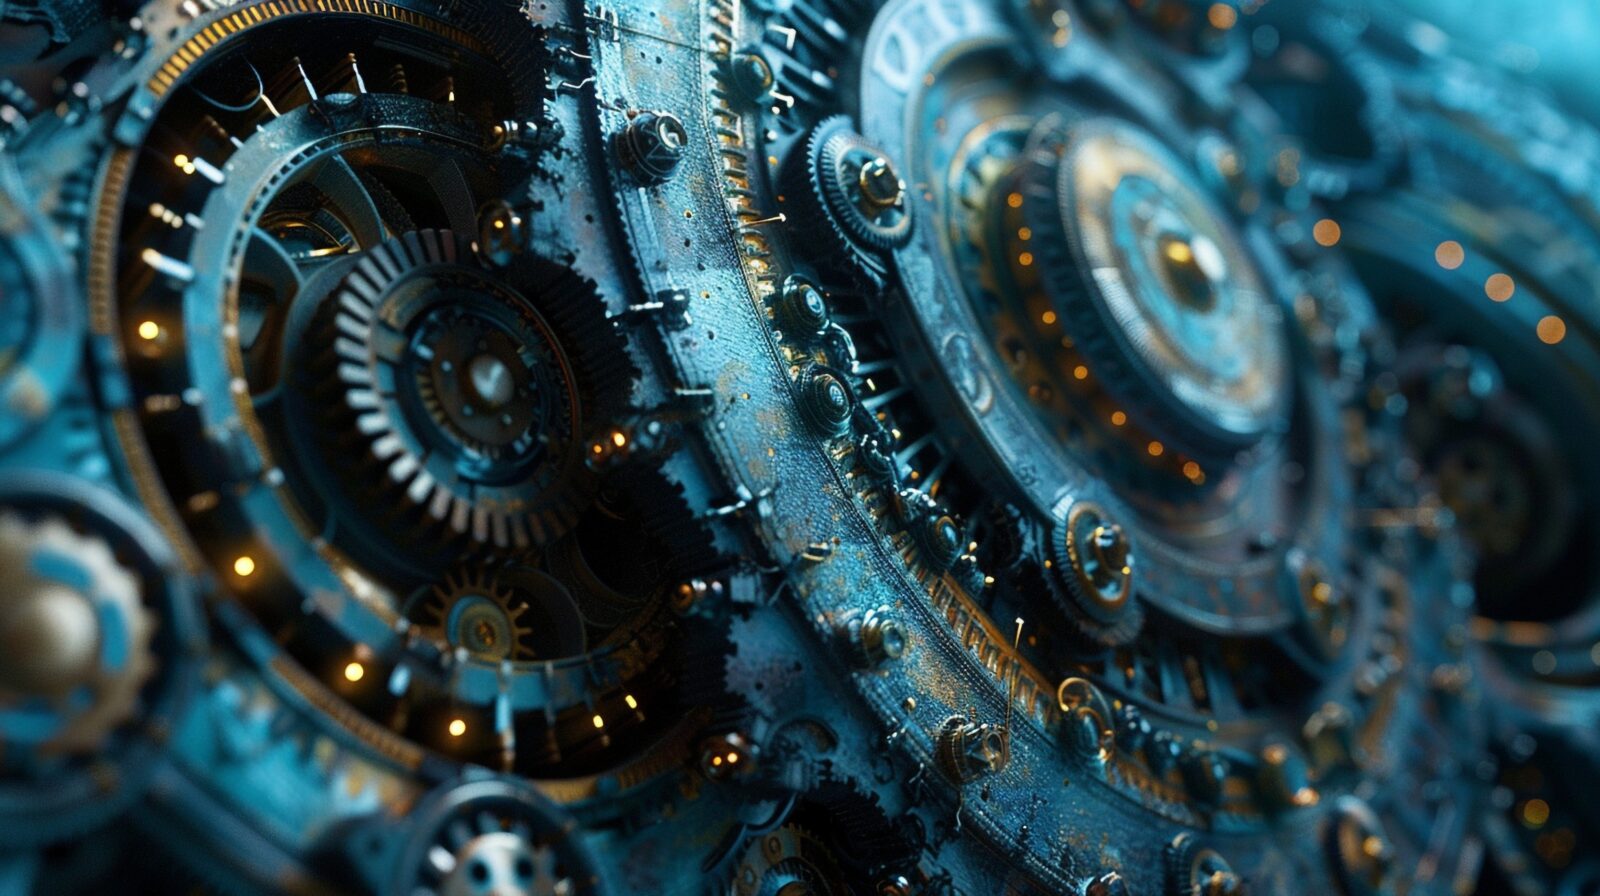 Interlocking gears and cogs rotating in perfect synchrony, symbolizing the intricate machinery of the universe.